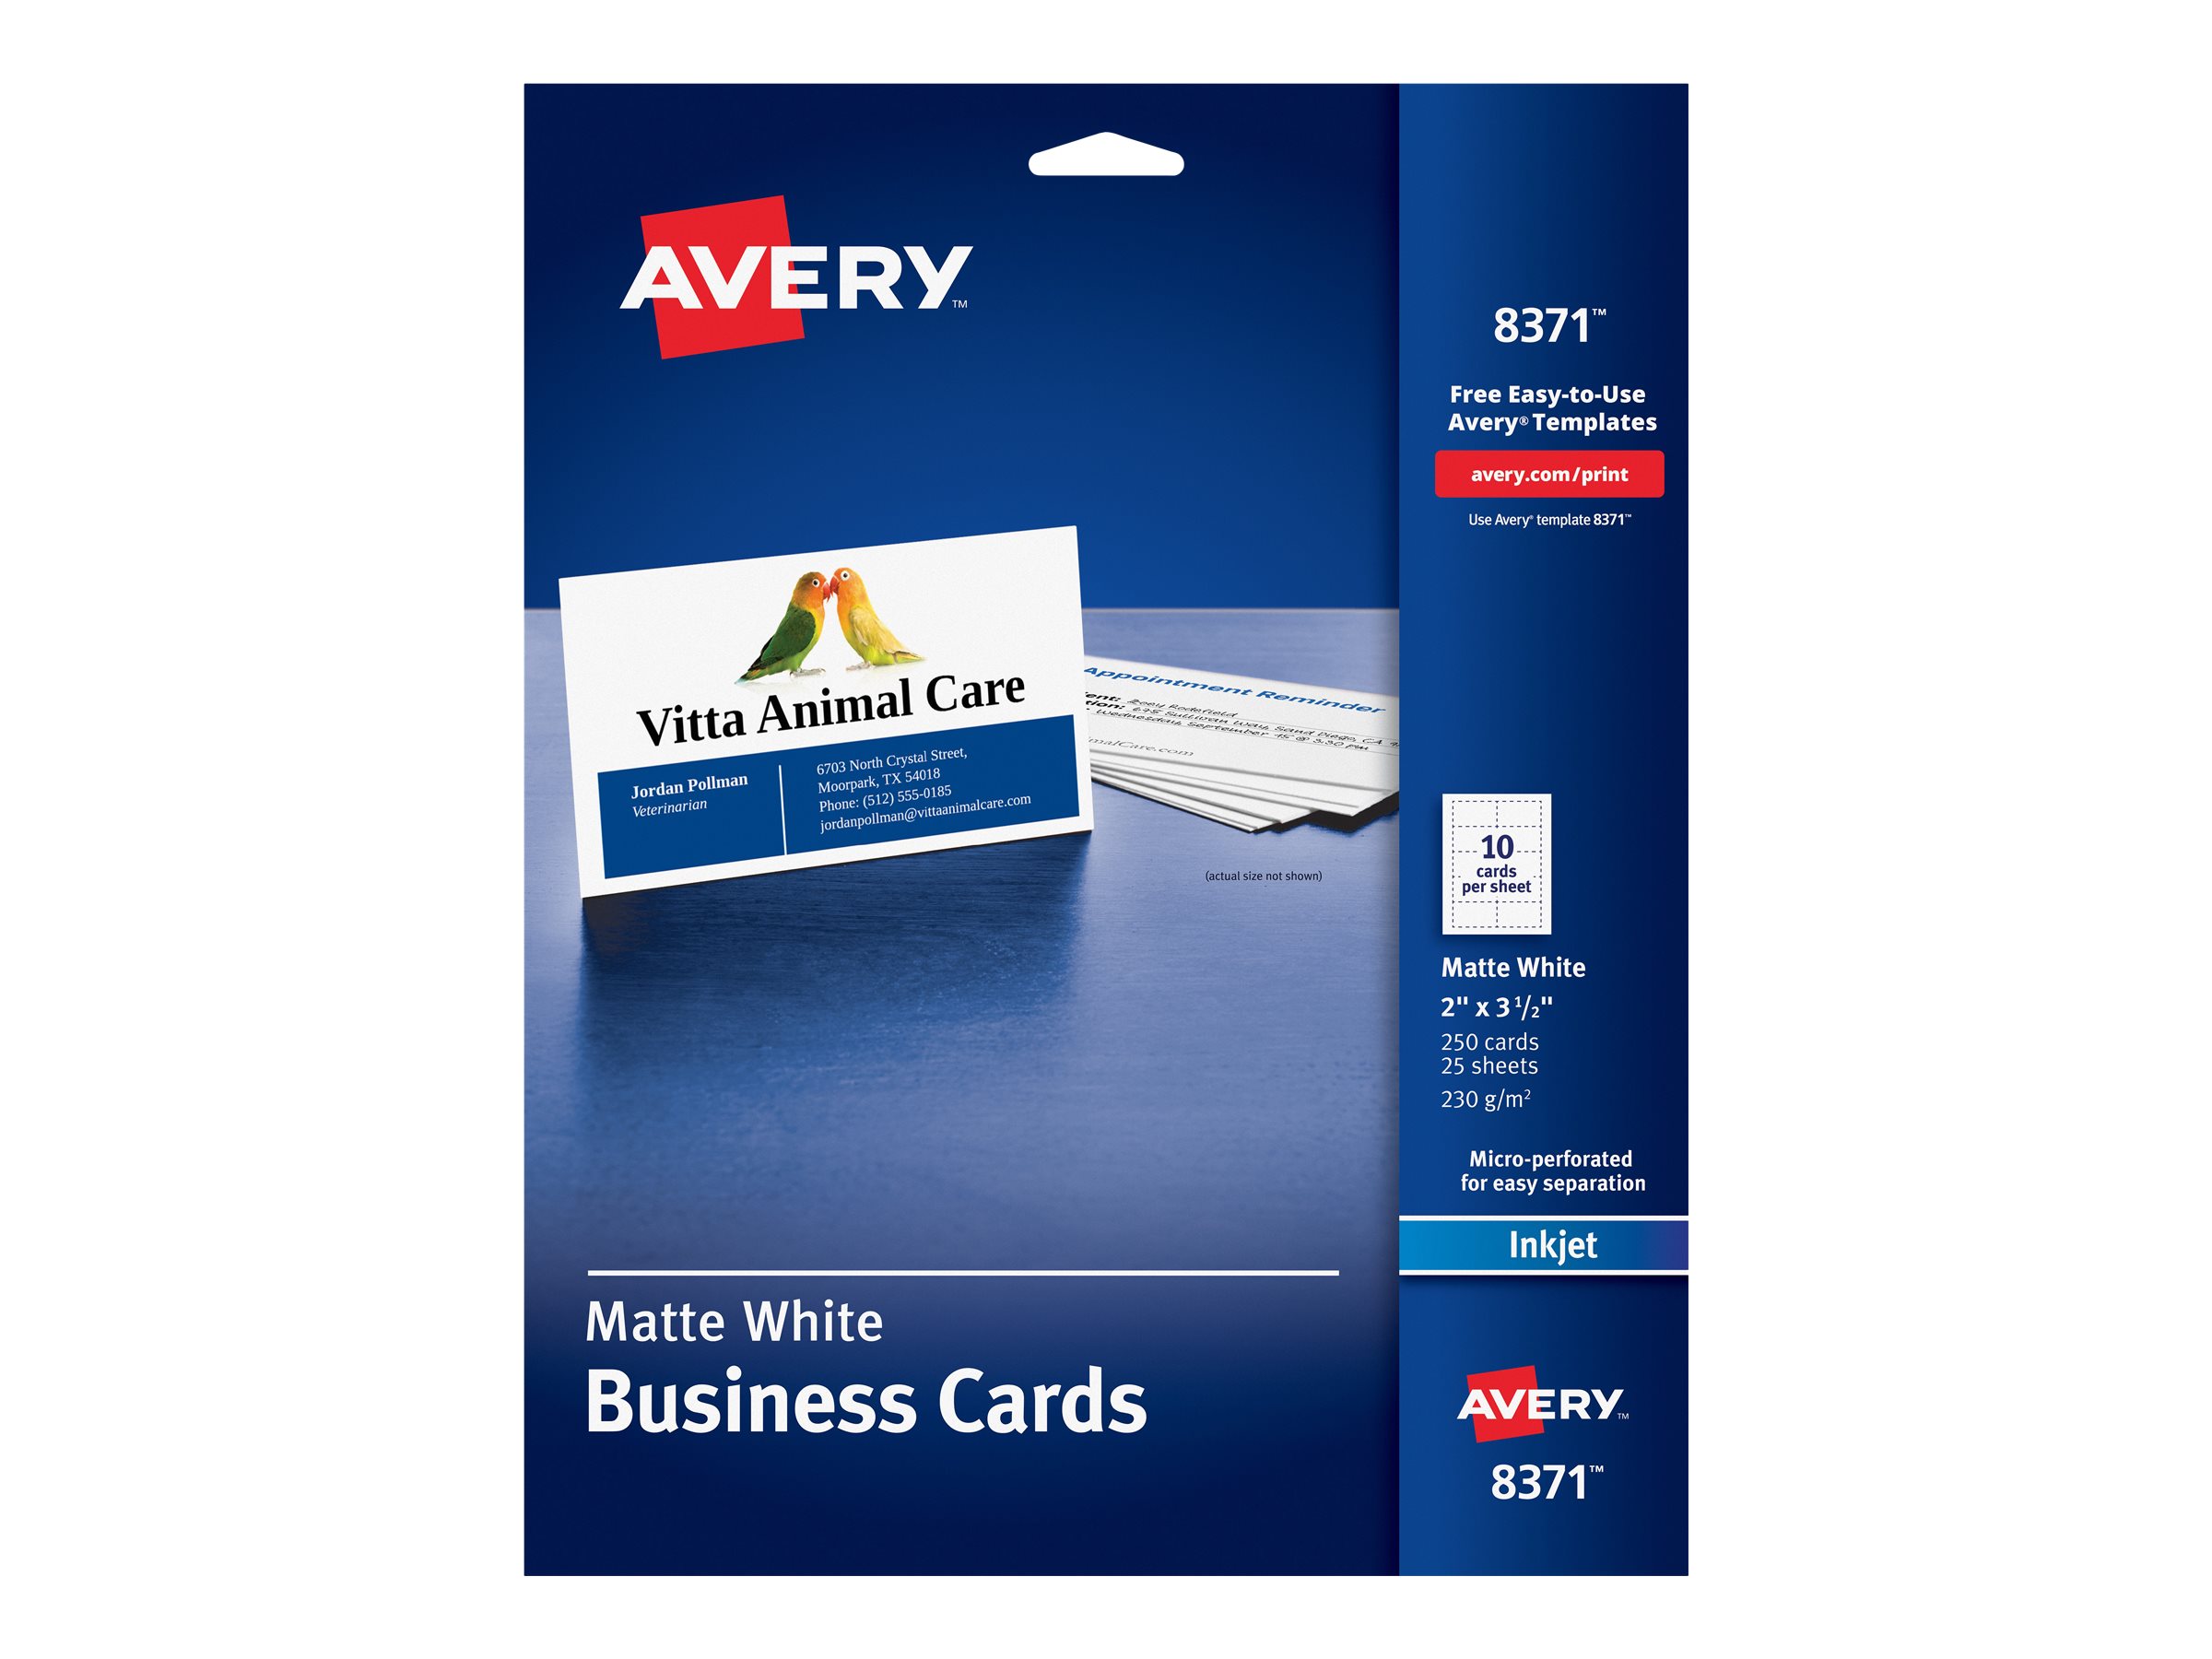 avery-business-card-ij-perf-8371